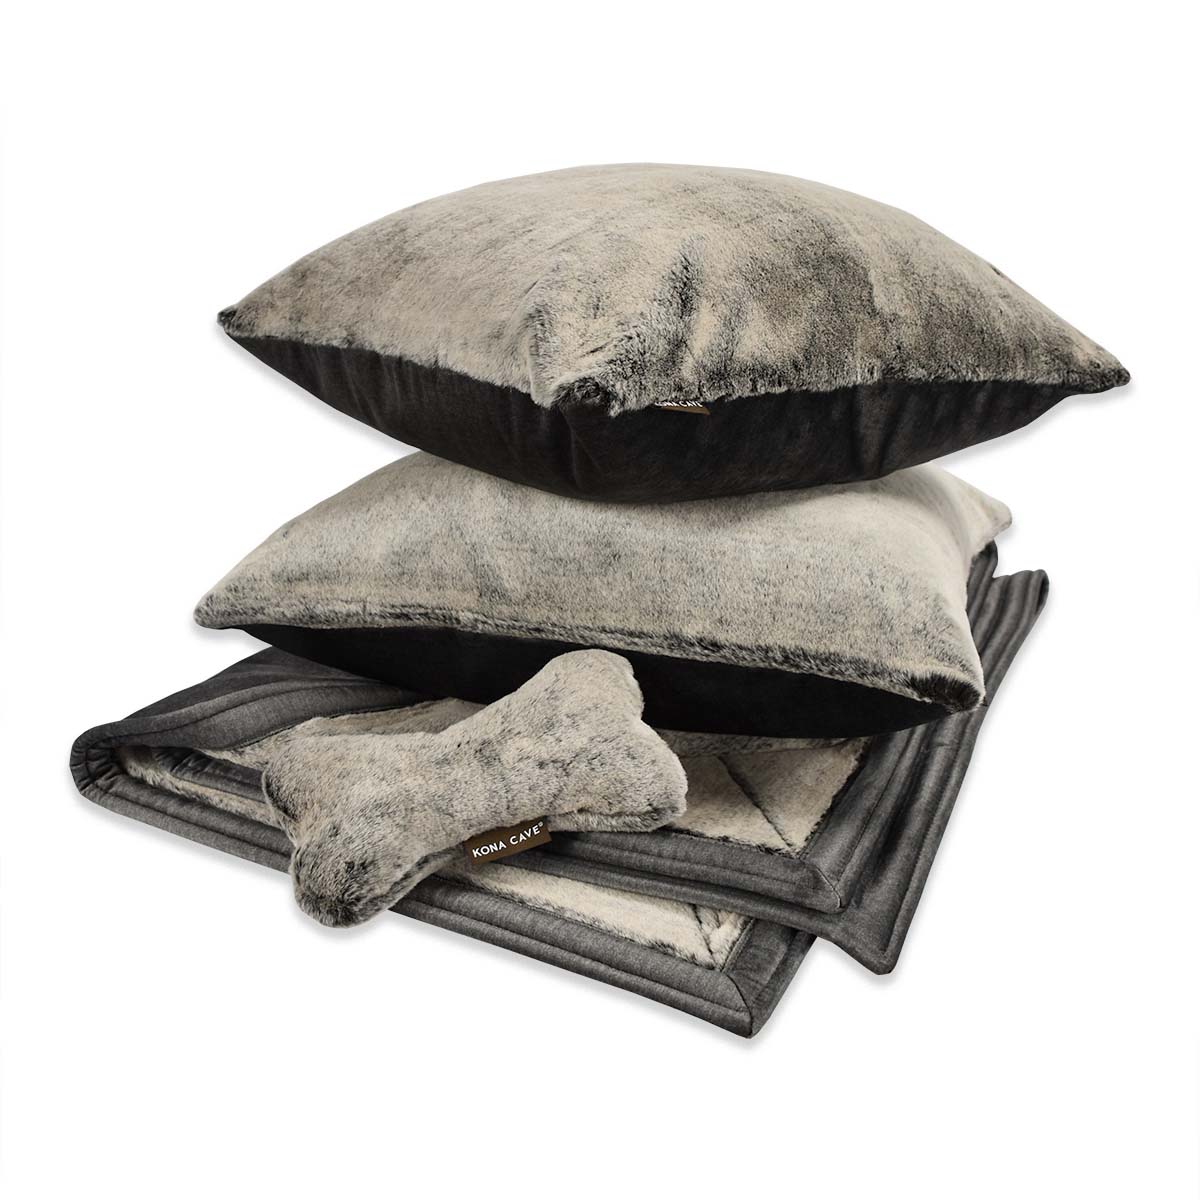 KONA CAVE® luxury faux fur and velvet dog gift set. Human quality faux fur. Set includes thick blanket, pillow covers and luxury faux fur dog toy.  Luxury dog present. 